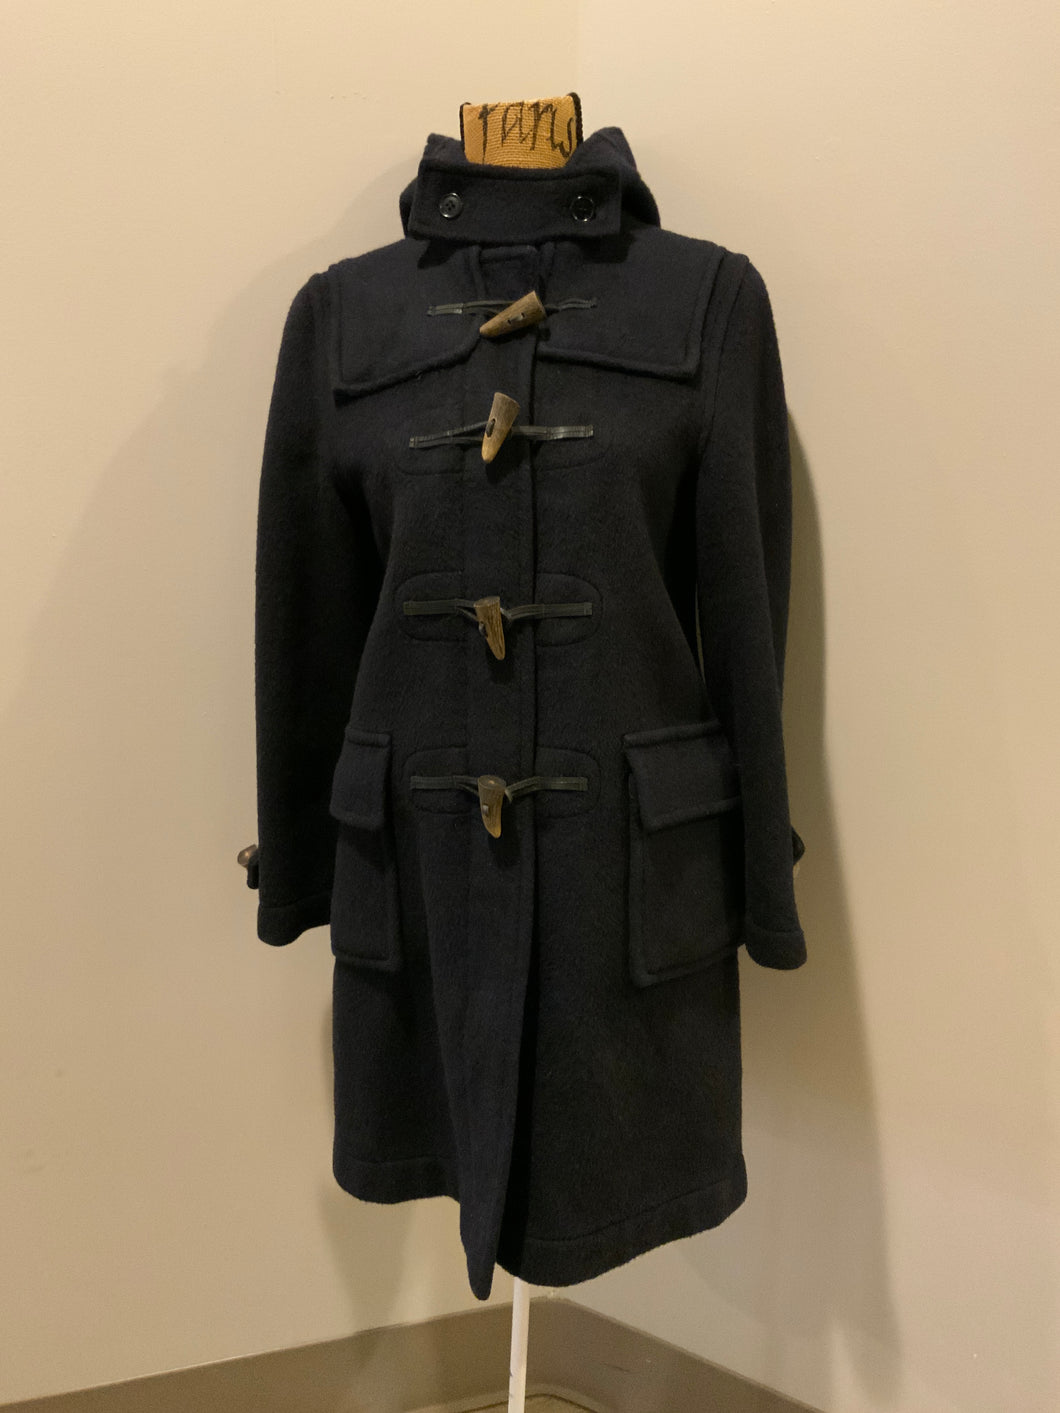 Kingspier Vintage - Gloverall navy blue wool duffle coat with hood, zipper, wooden toggles, flap pockets and green plaid lining. Made in England. 